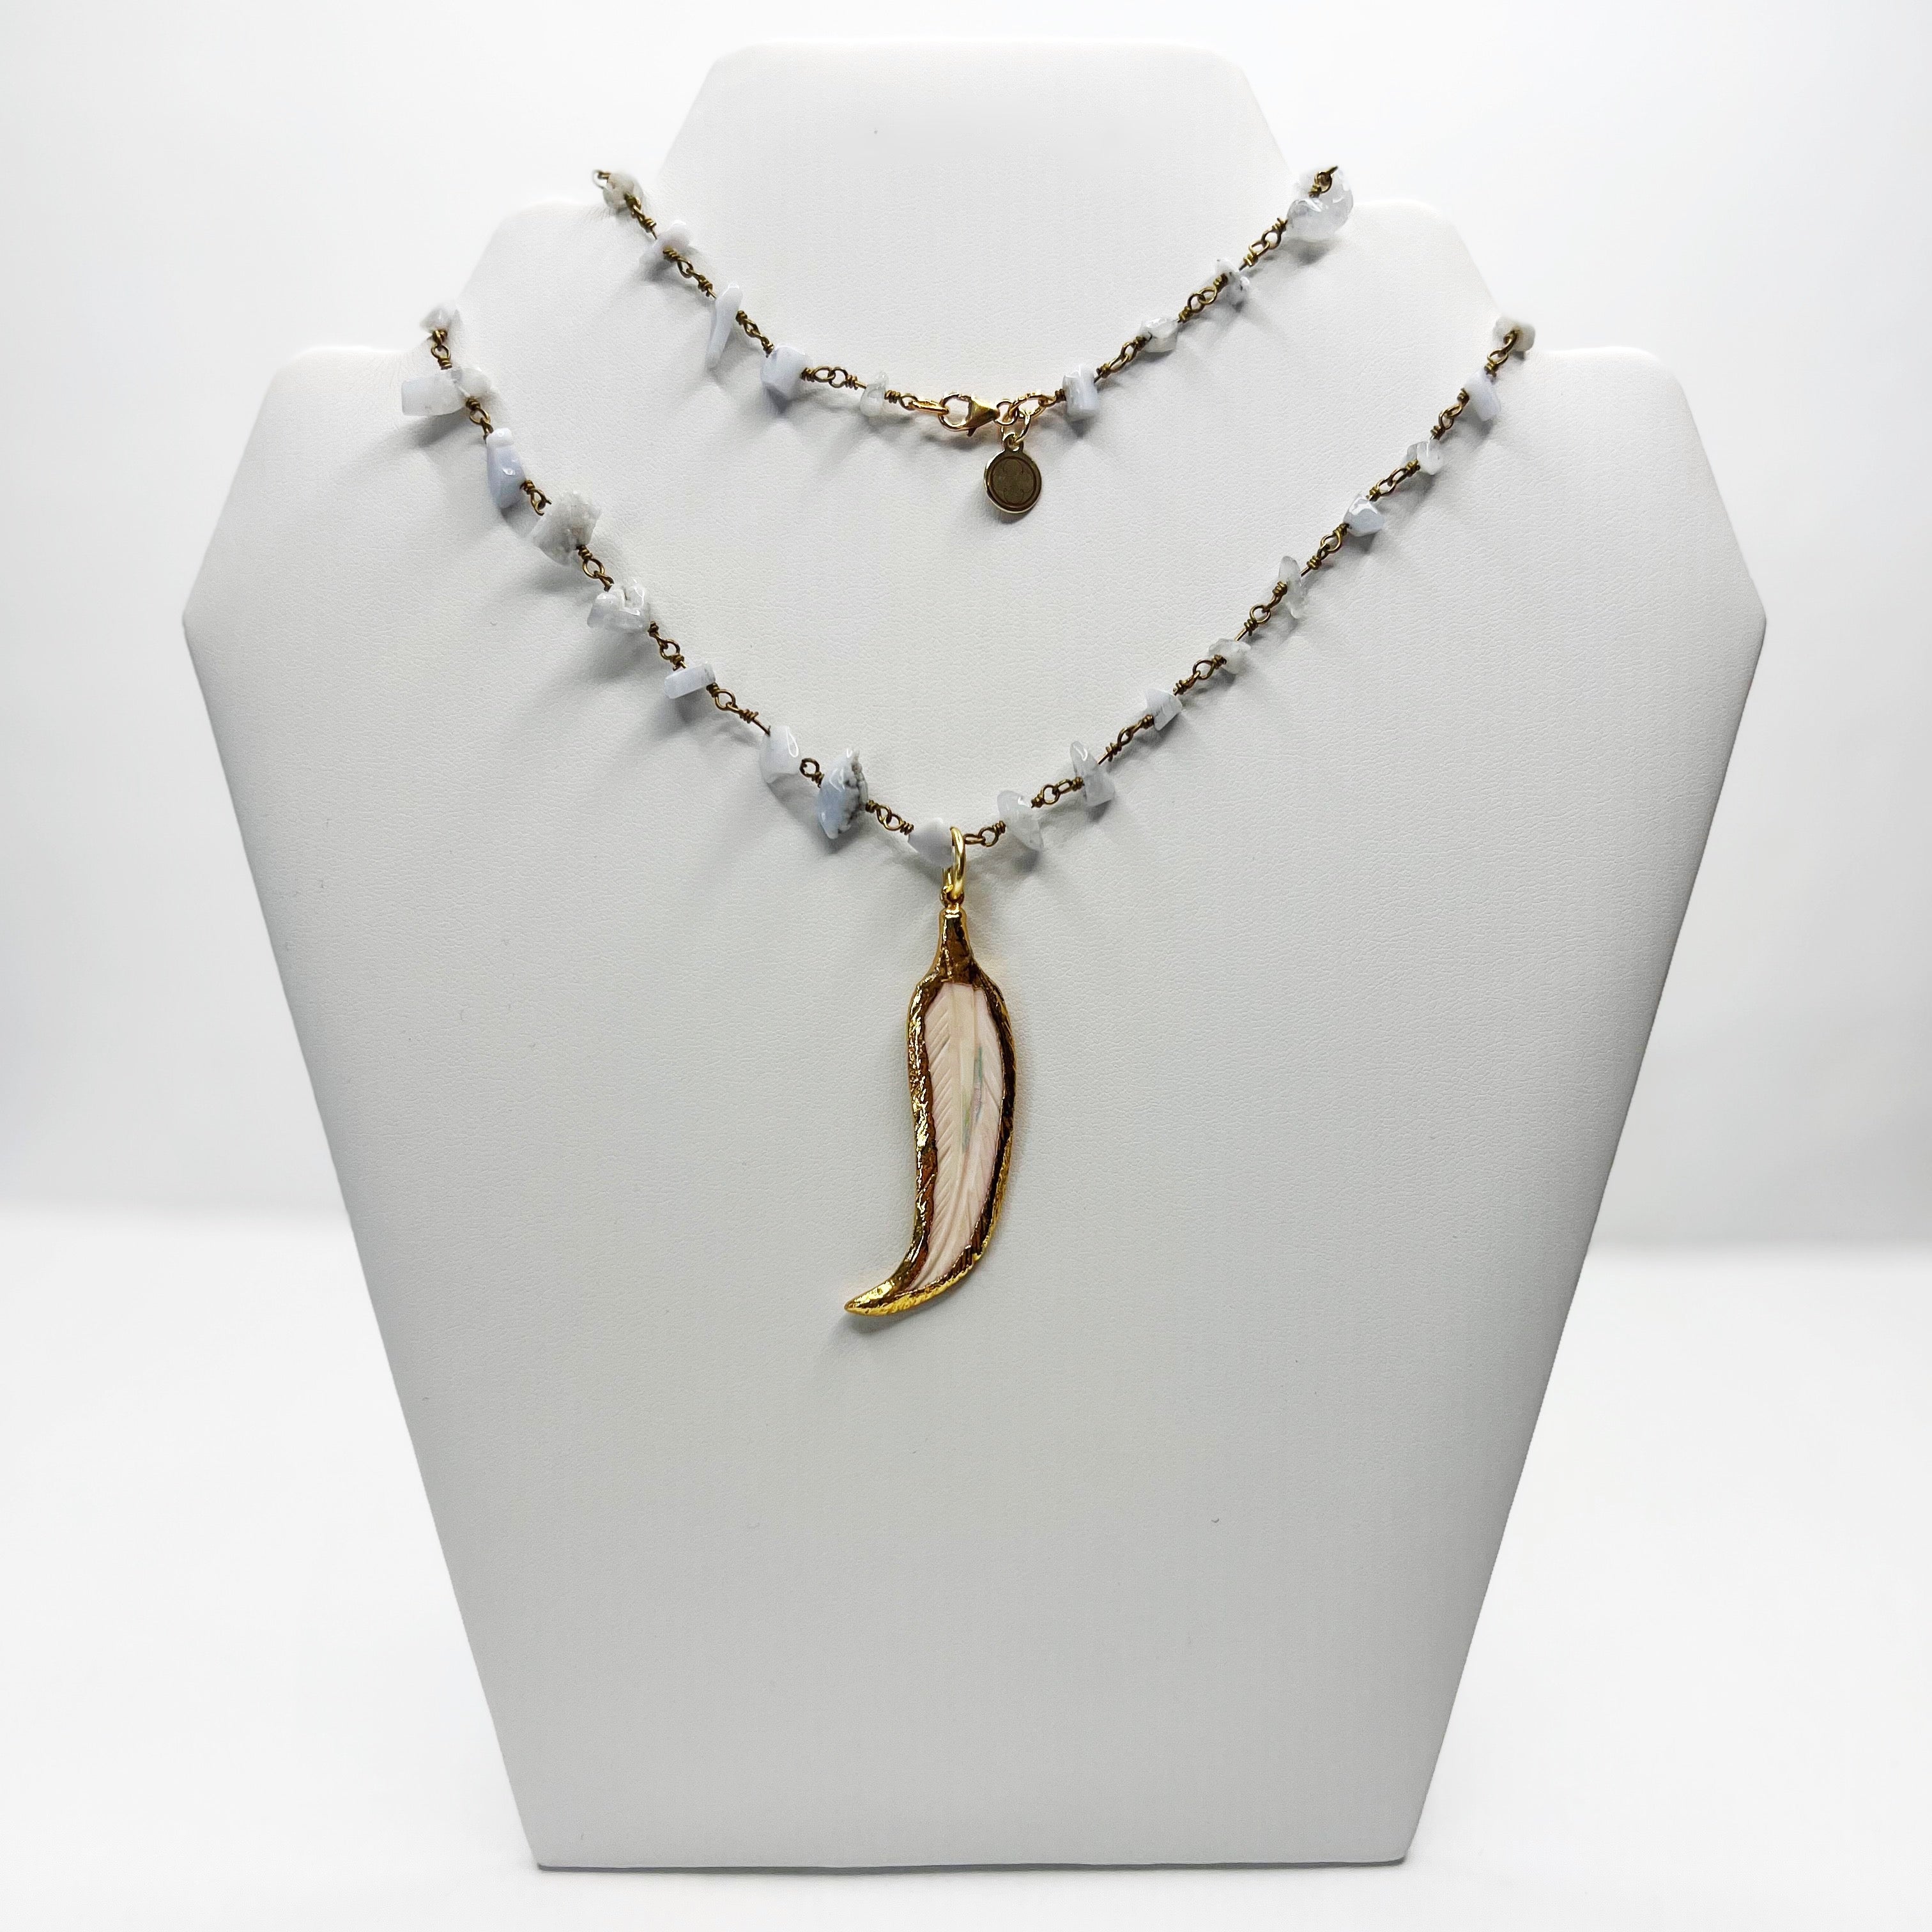 Serenity Agate Beaded Chain with White Quartz Feather Necklace